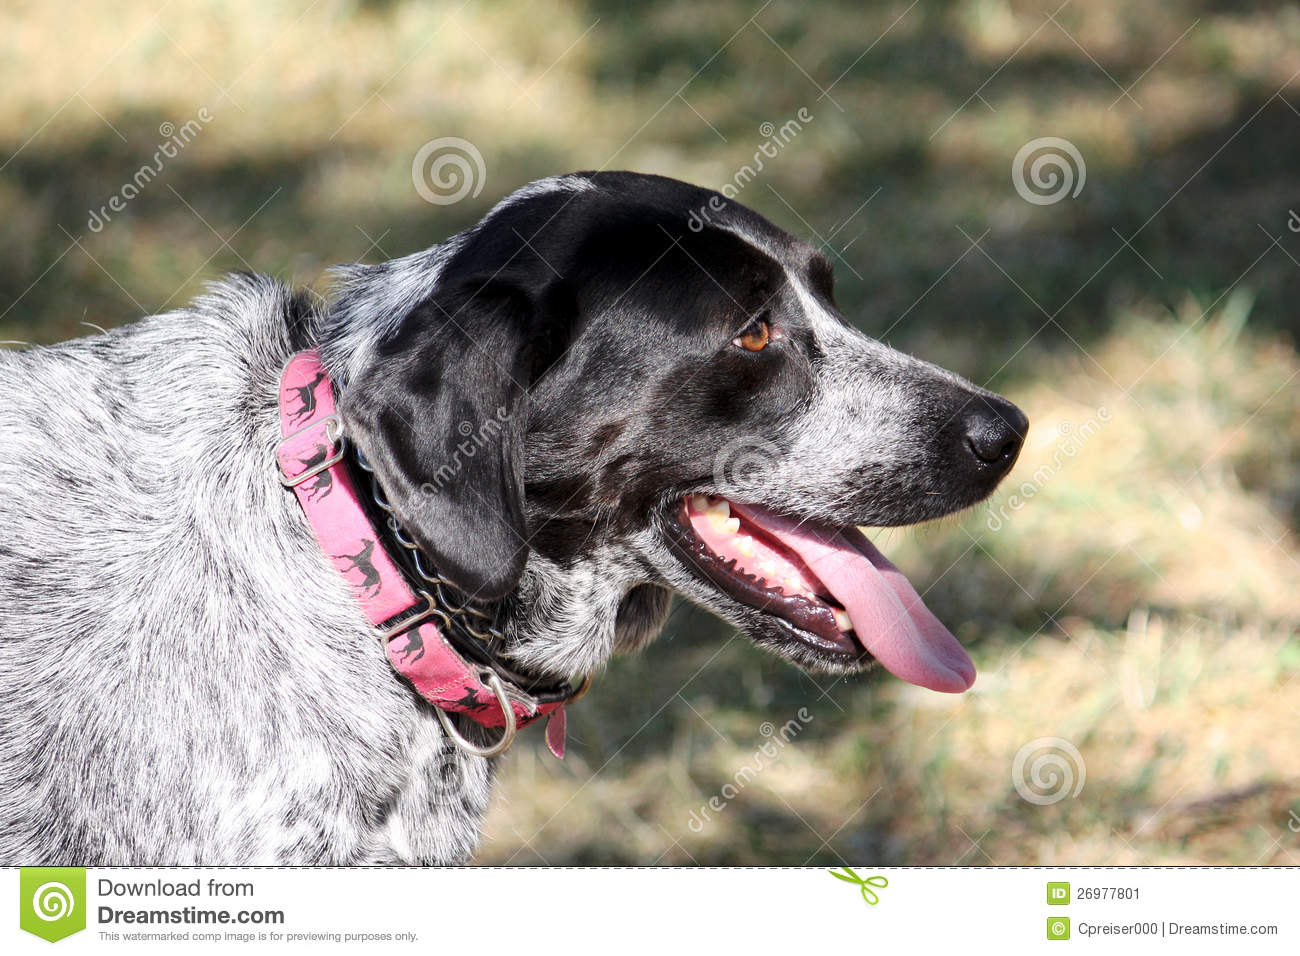 Dog Cooling Off In Shade Stock Image   Image  26977801